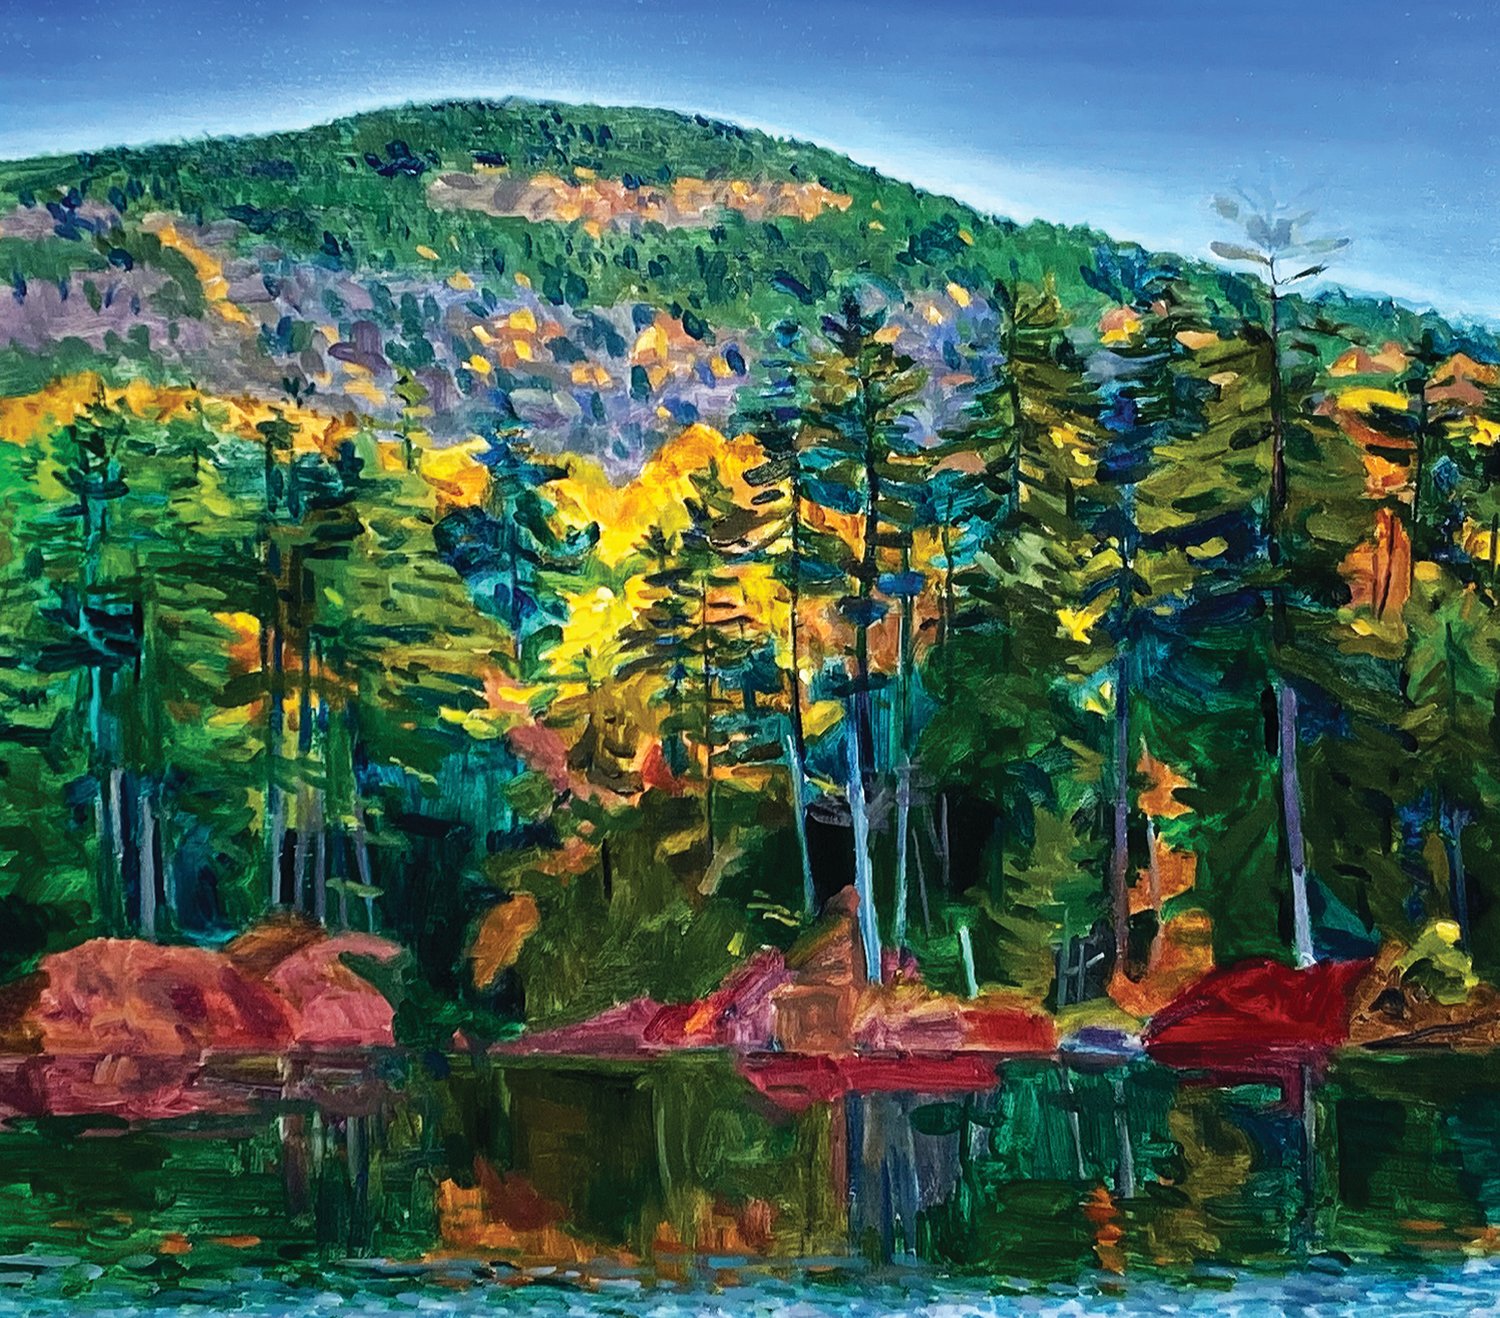 “Fox Pond and Caribou Mountain” is a 2022 oil on canvas, by John Schmidtberger.